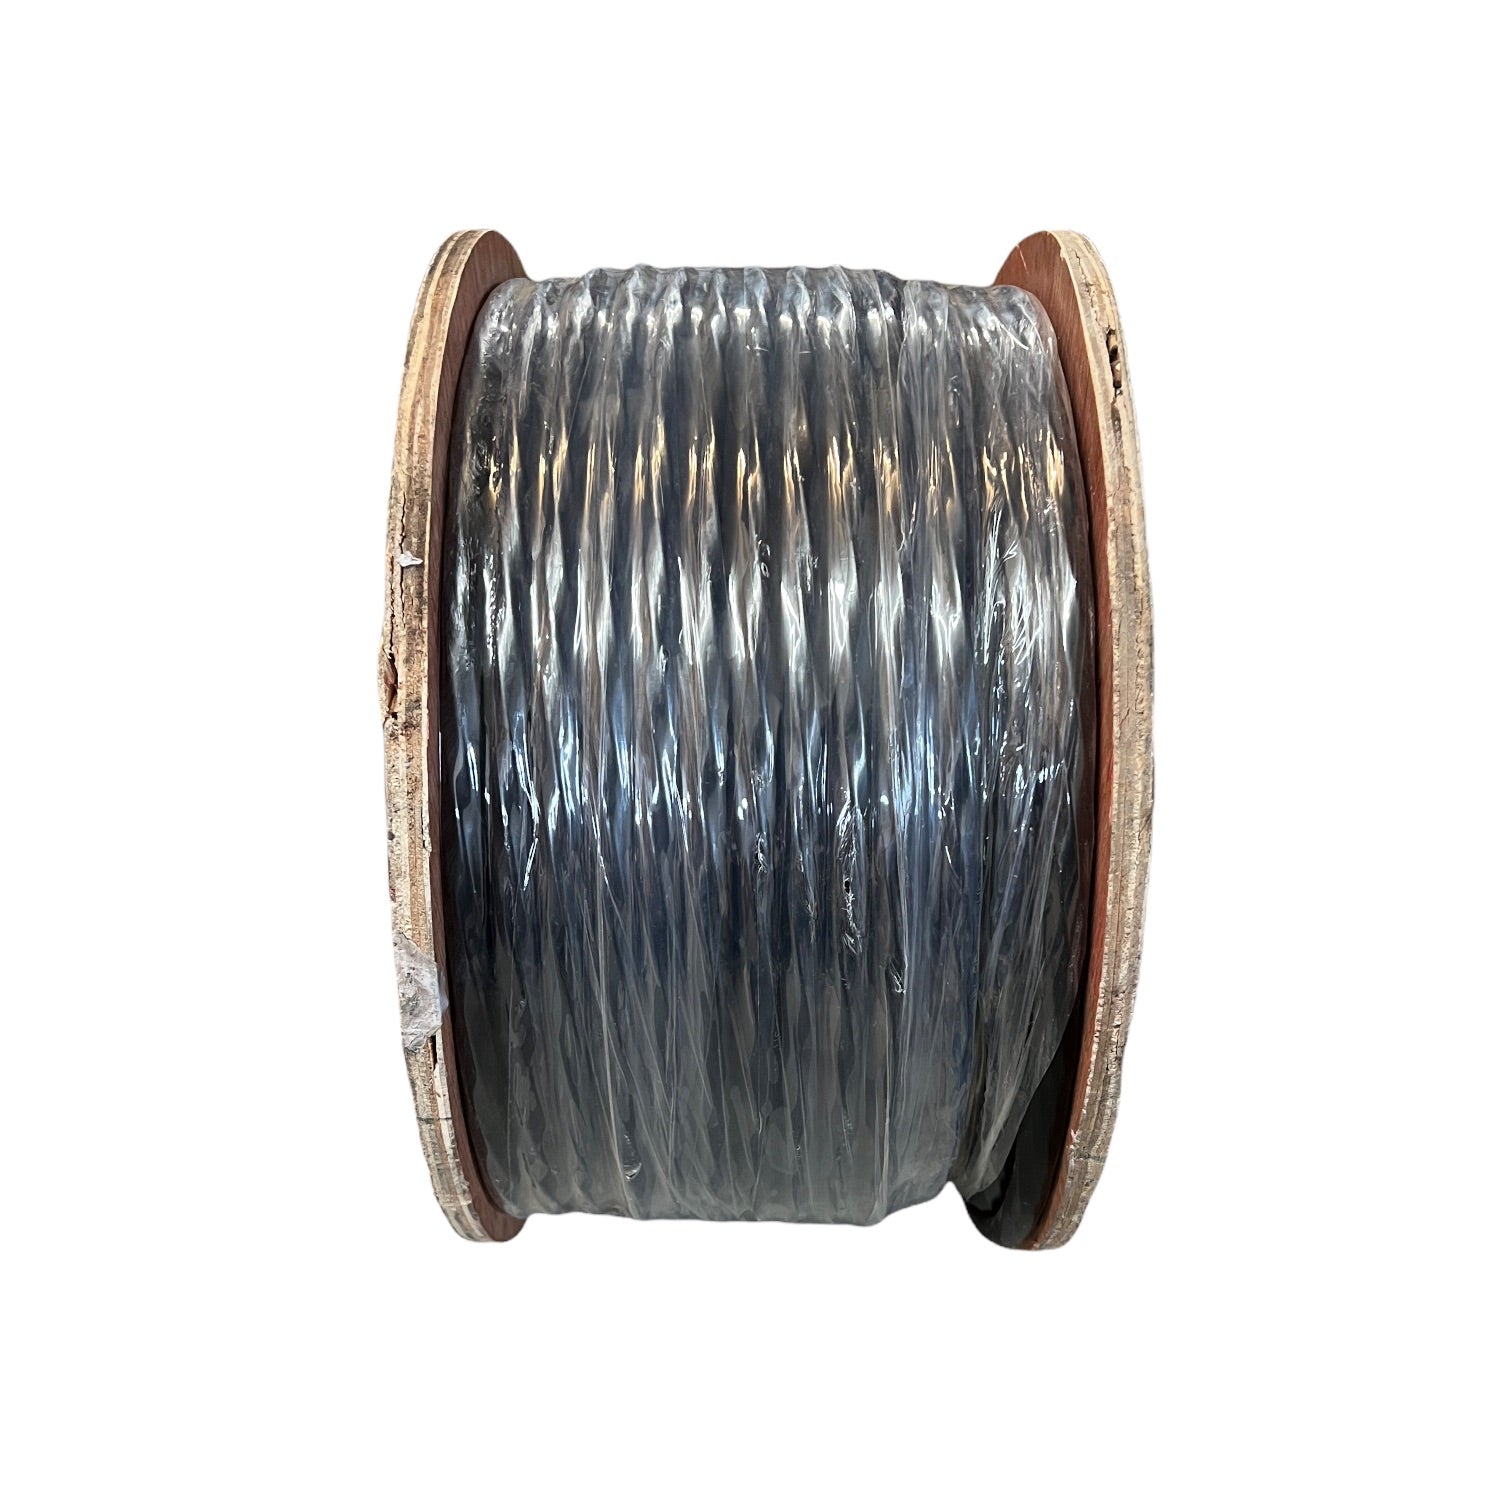 18/3X500 - Multi-Conductor Irrigation Control Wire, 18 awg, 18/3 X 500 ft